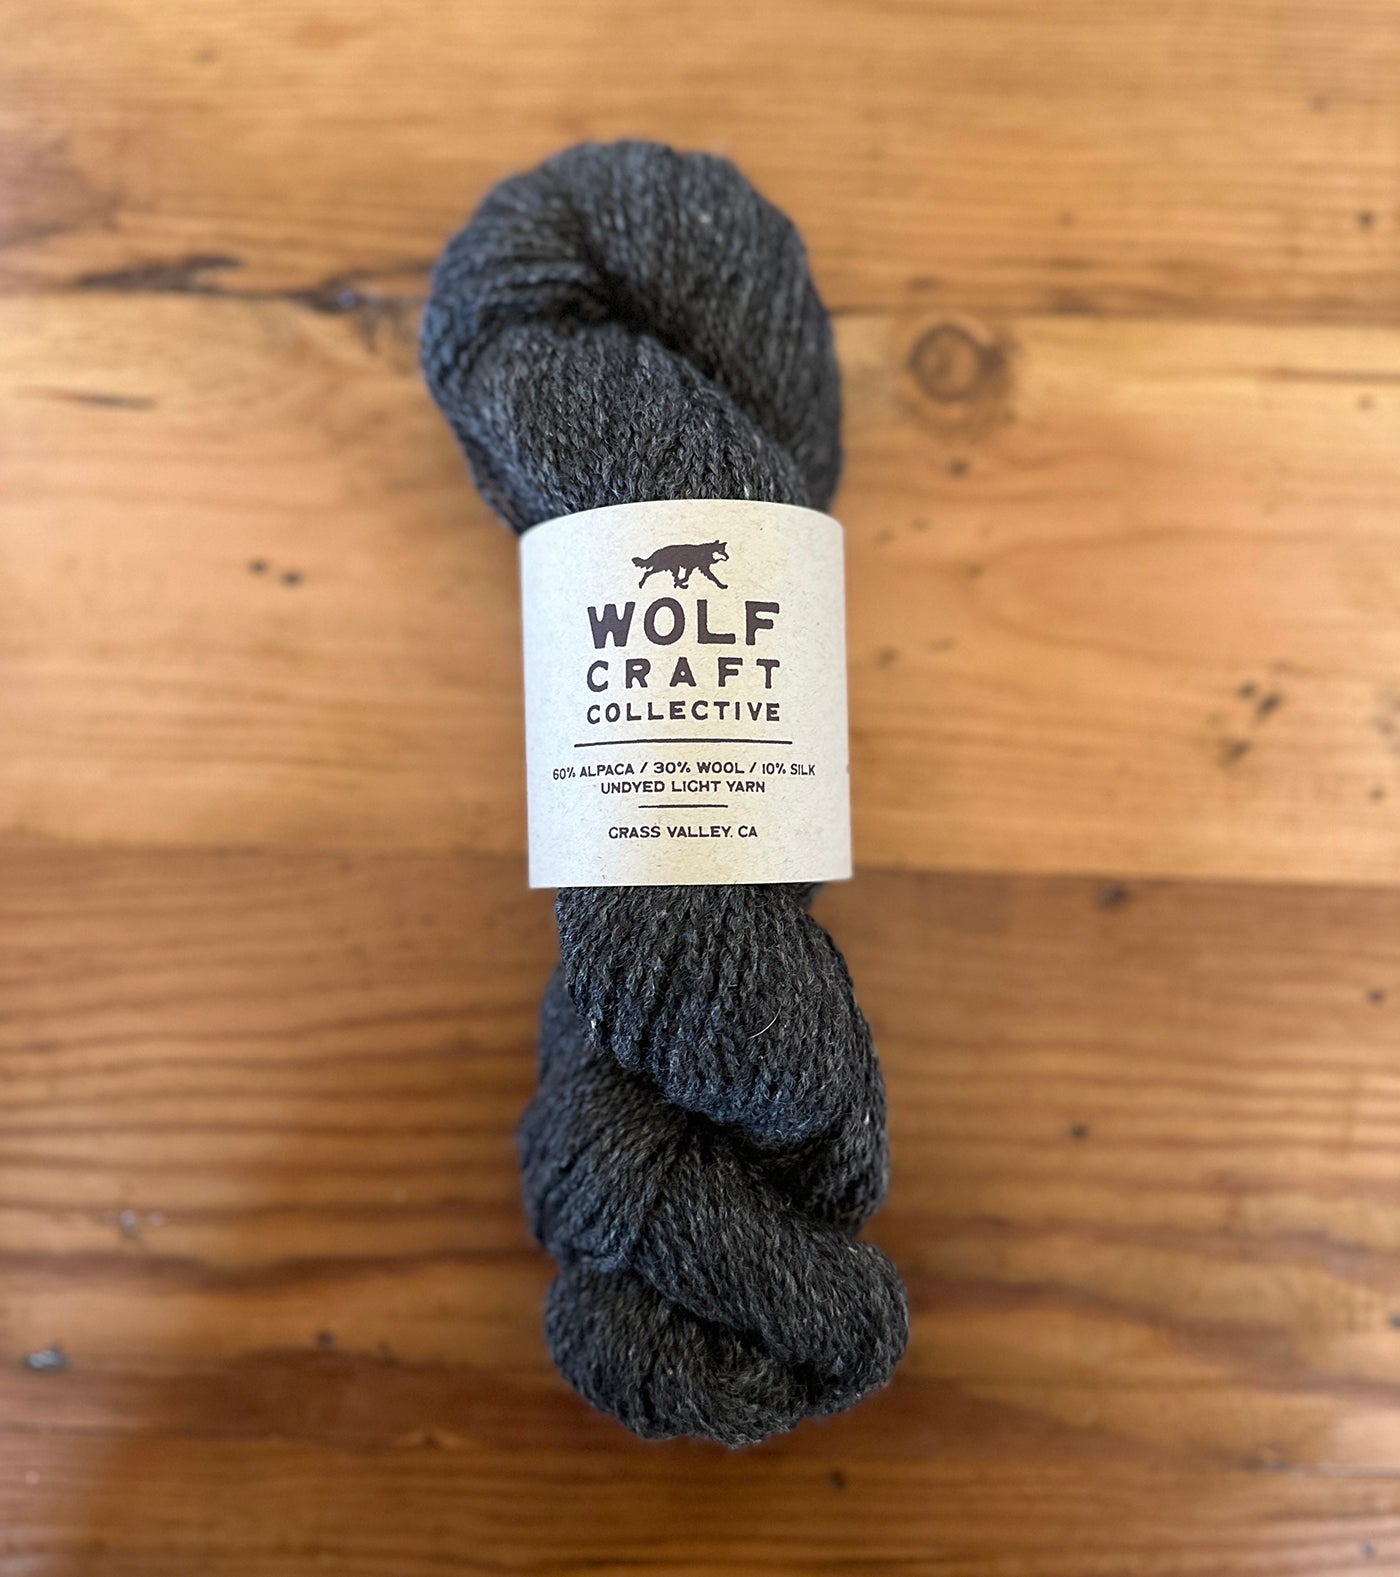 Buy Alpaca Merino Cotton: 5 Bulky Weight Yarn for All Seasons. Soft and  Chunky Yarn Without the Bulk, Fluffy but Not Itchy. XOXO Oatmeal Online in  India 